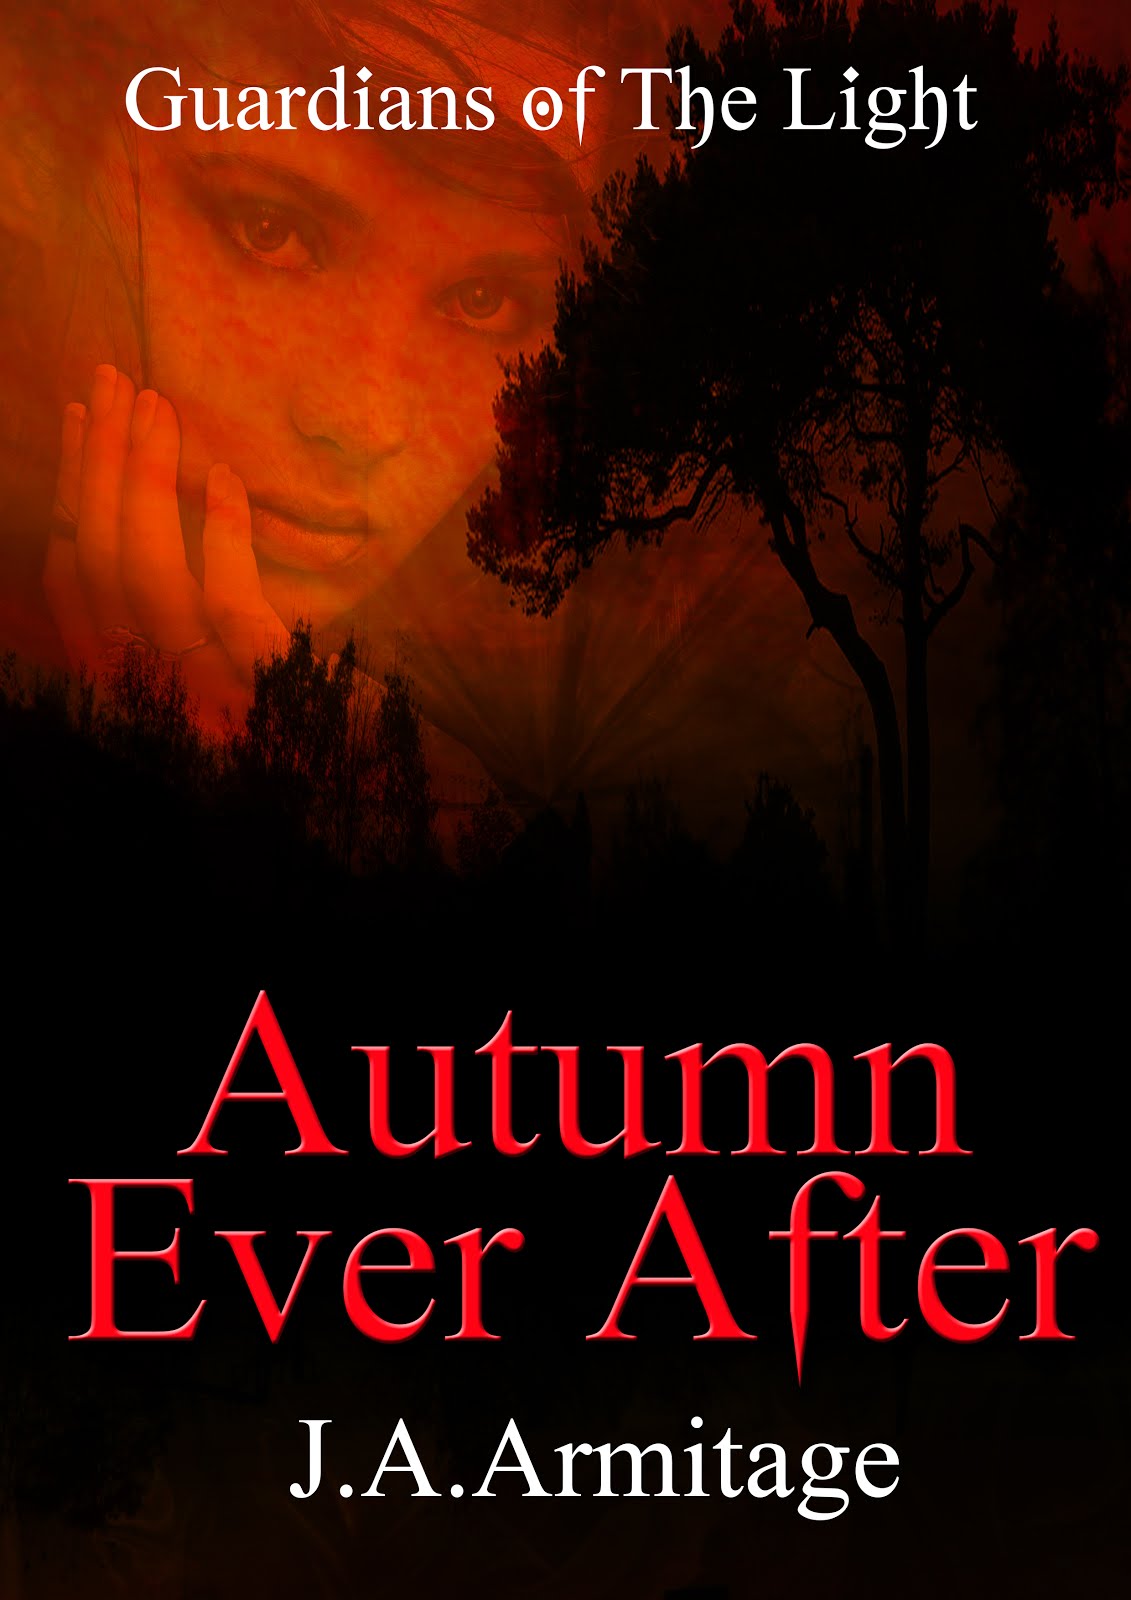 Autumn ever After